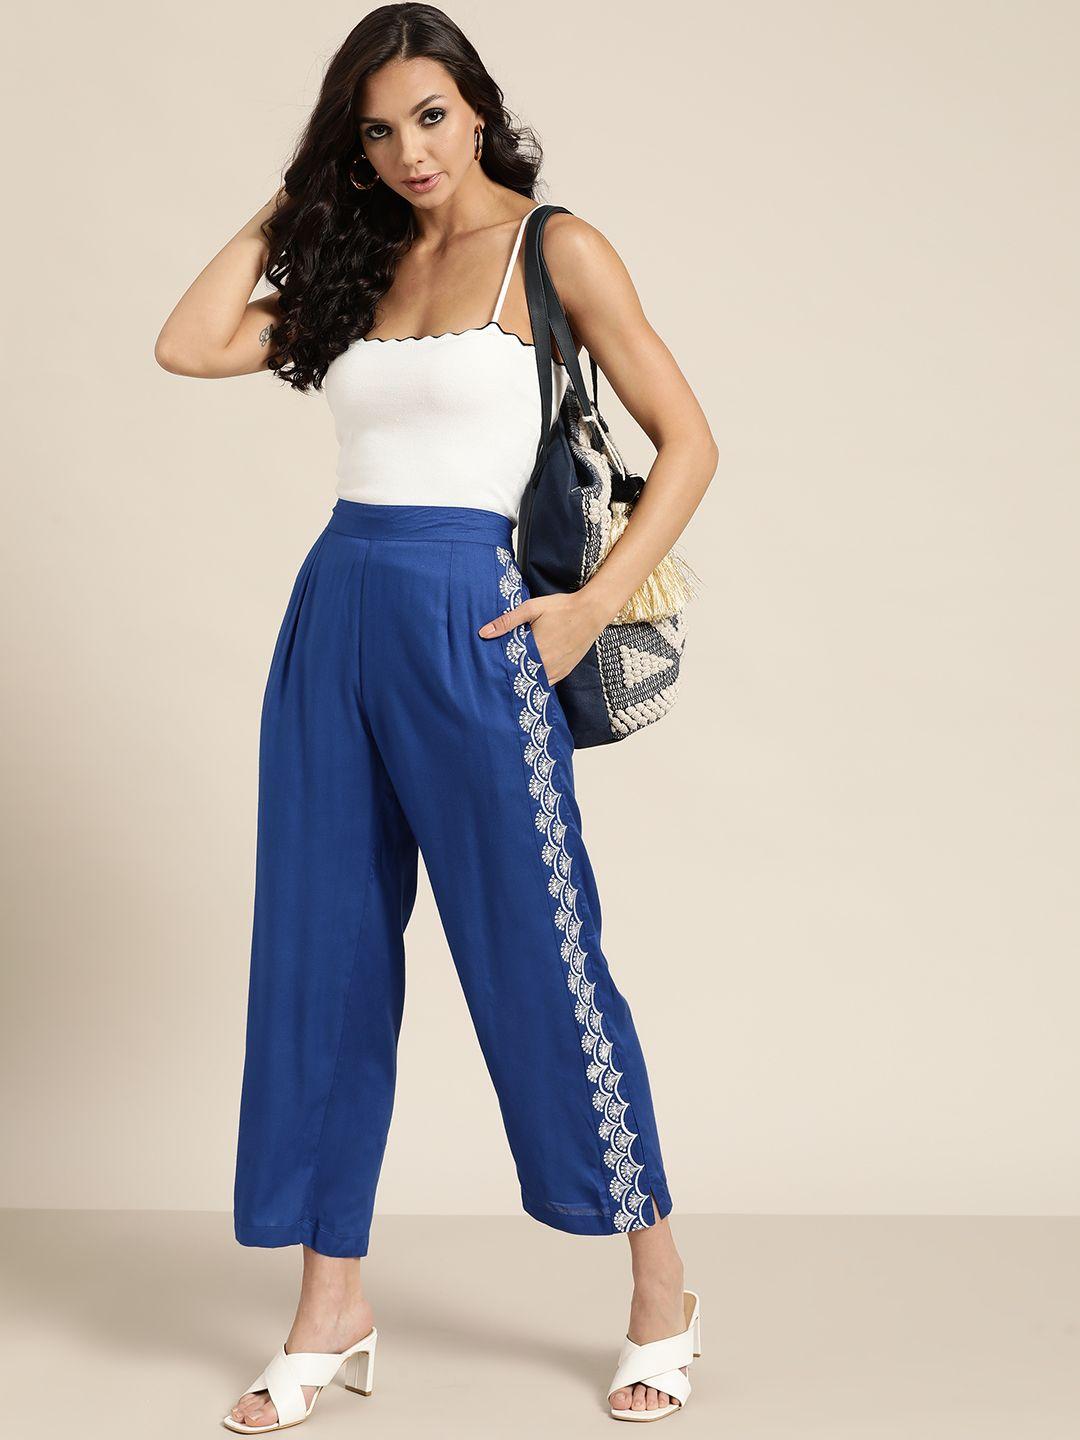 shae-by-sassafras-women-blue-solid-pleated-trousers-with-embroidered-detail